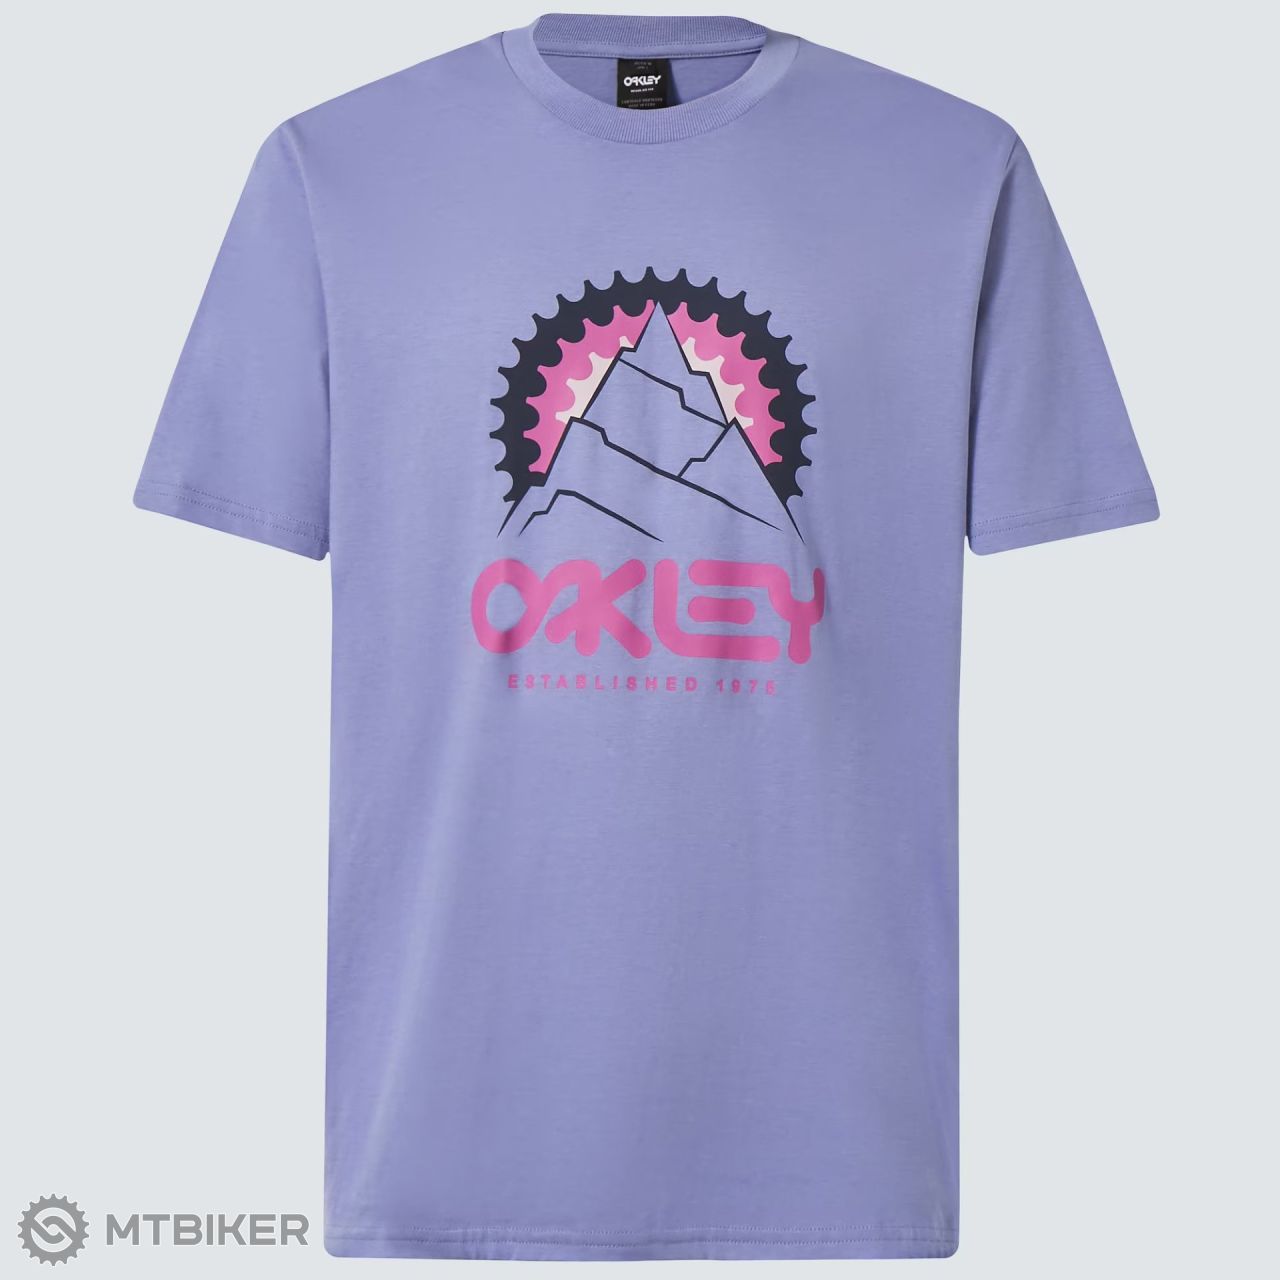 Oakley Mountains Out B1B shirt, new lilac